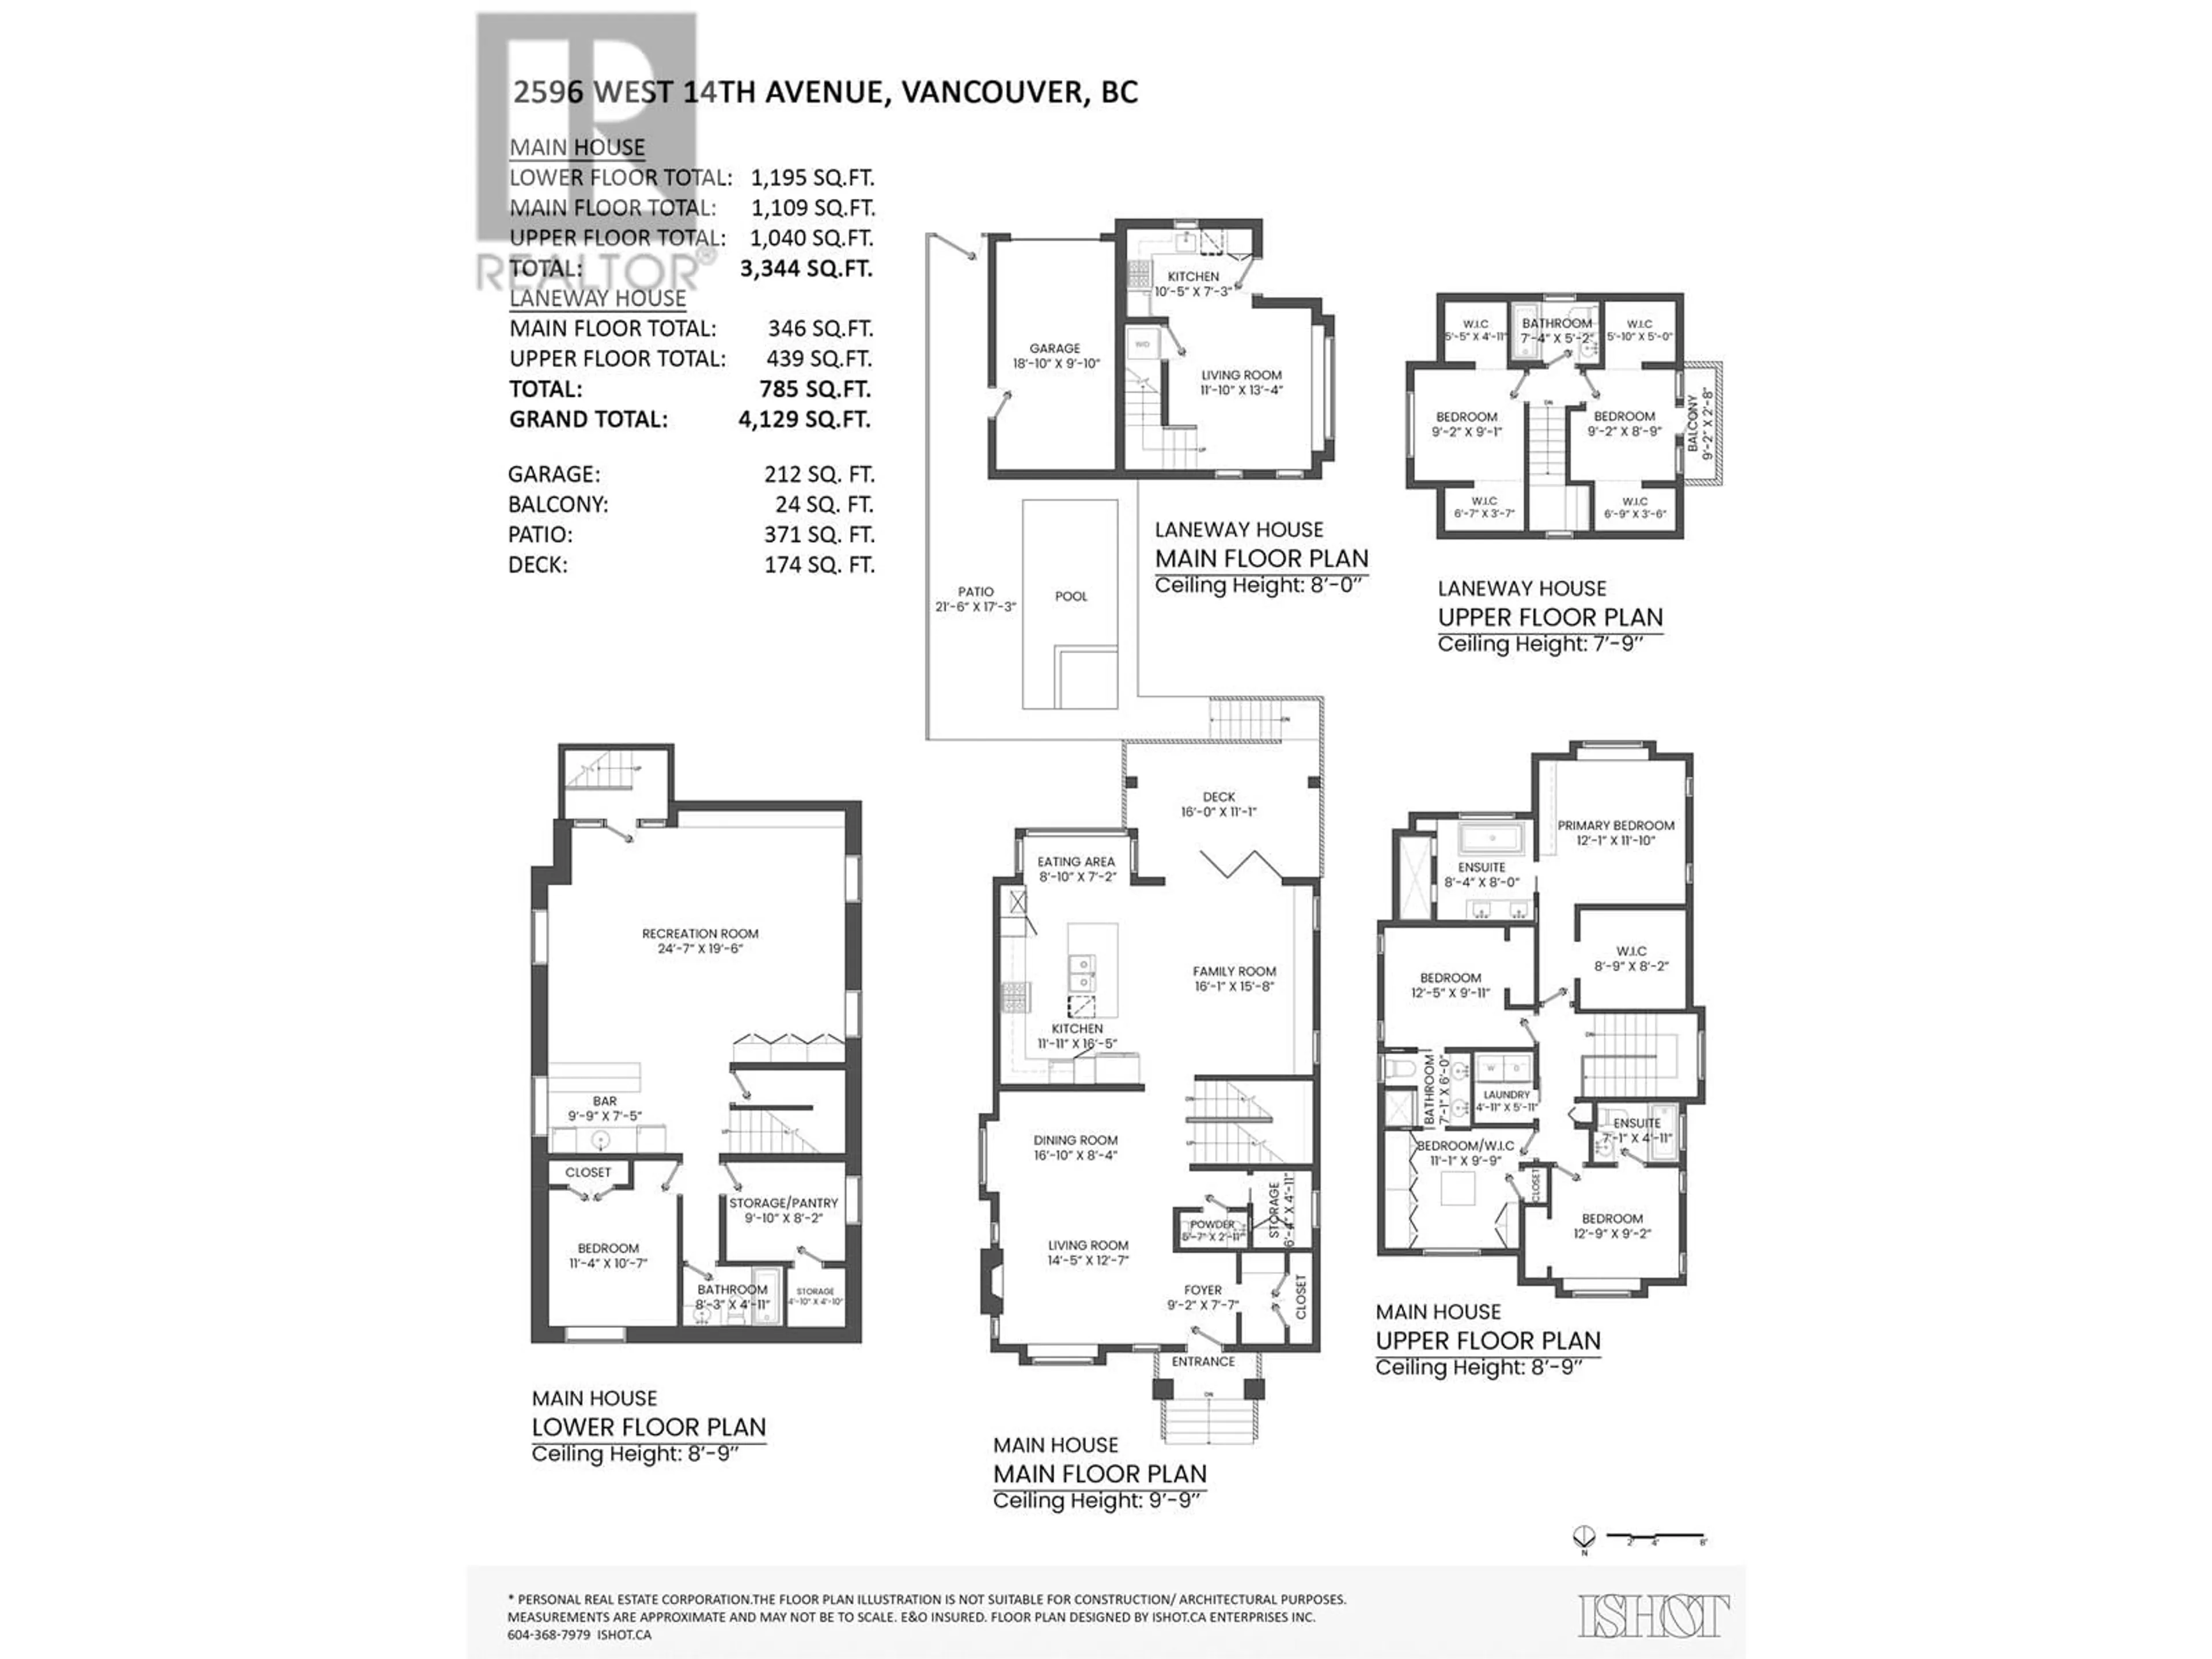 Floor plan for 2596 W 14TH AVENUE, Vancouver British Columbia V6K2W7